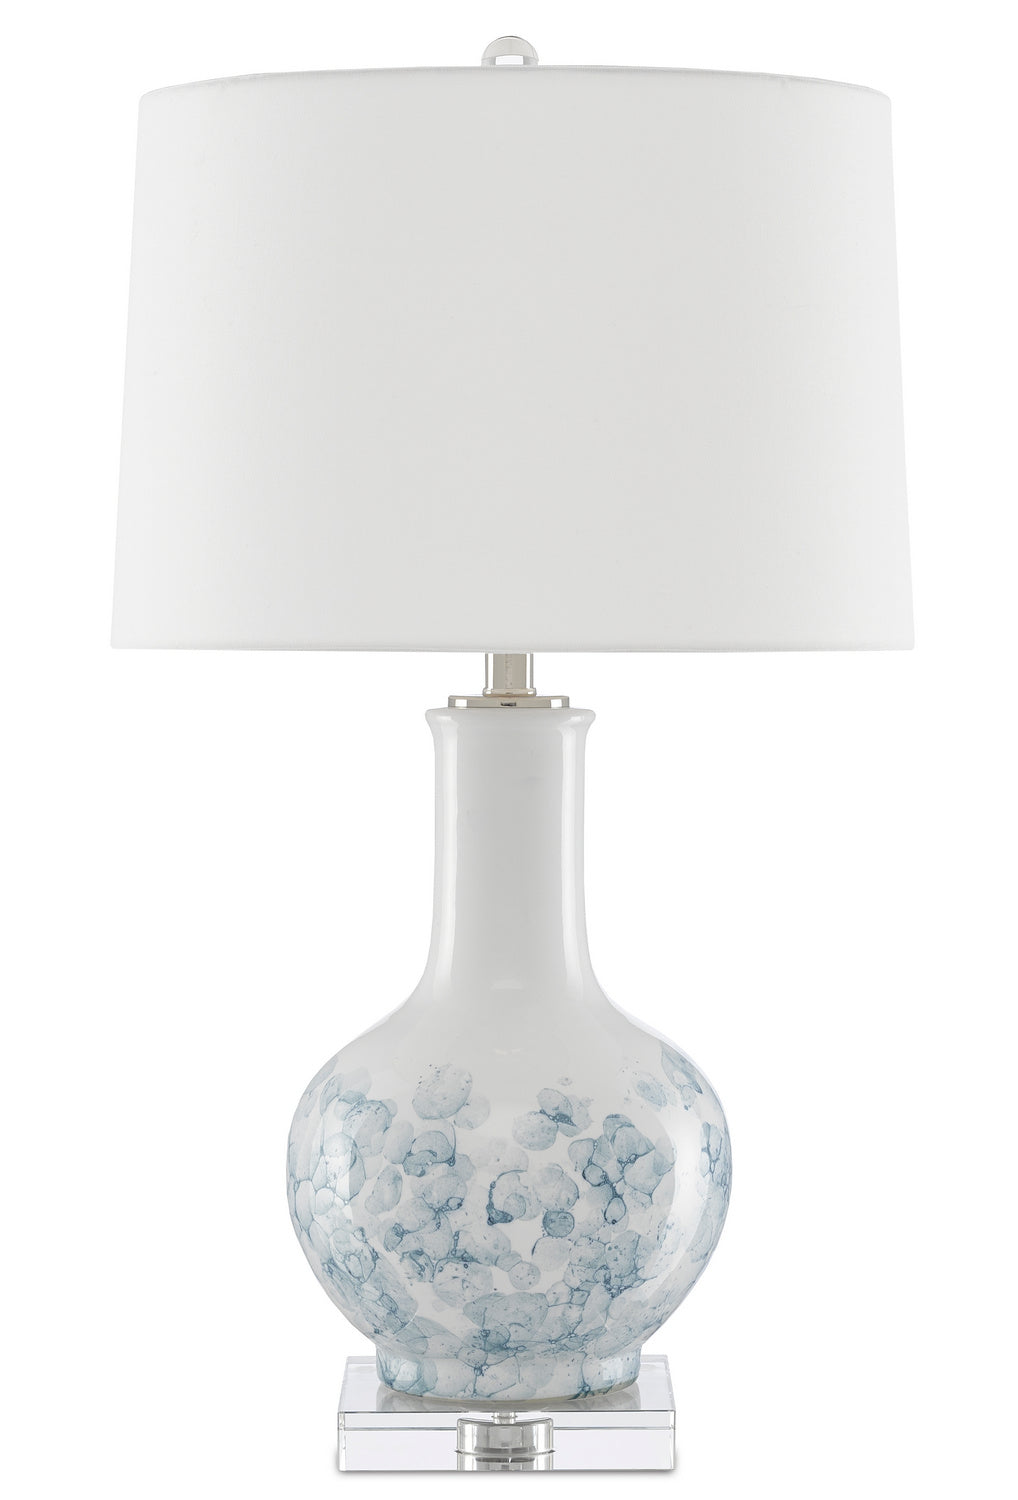 One Light Table Lamp from the Myrtle collection in White/Blue/Clear/Polished Nickel finish